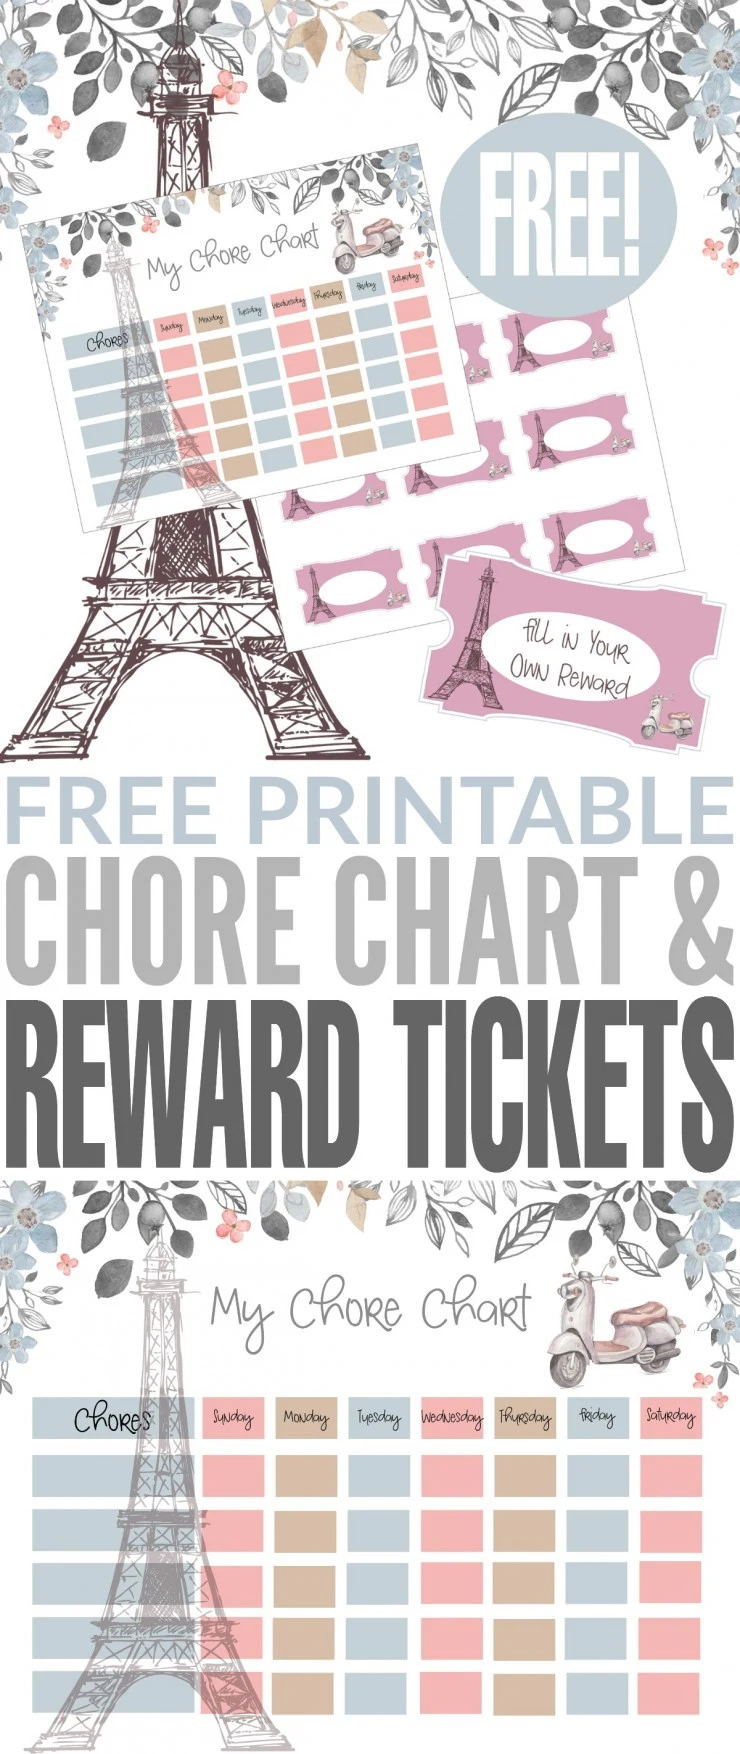 These Paris themed Free Printable Chore Chart & Reward Tickets are so cute don’t you think? They are a great way to encourage your children to track and complete chores.